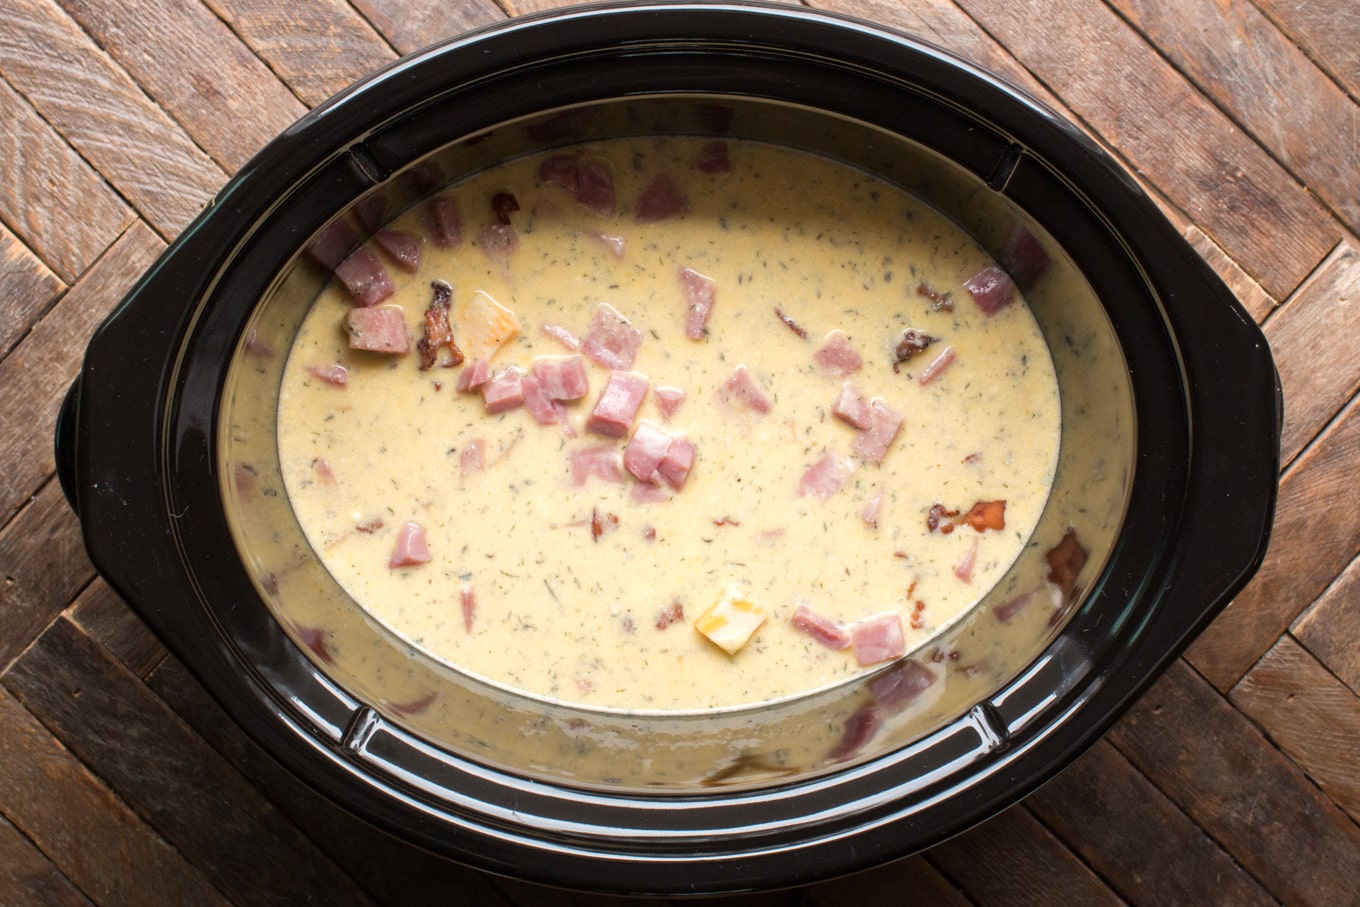 raw eggs and ham in a slow cooker